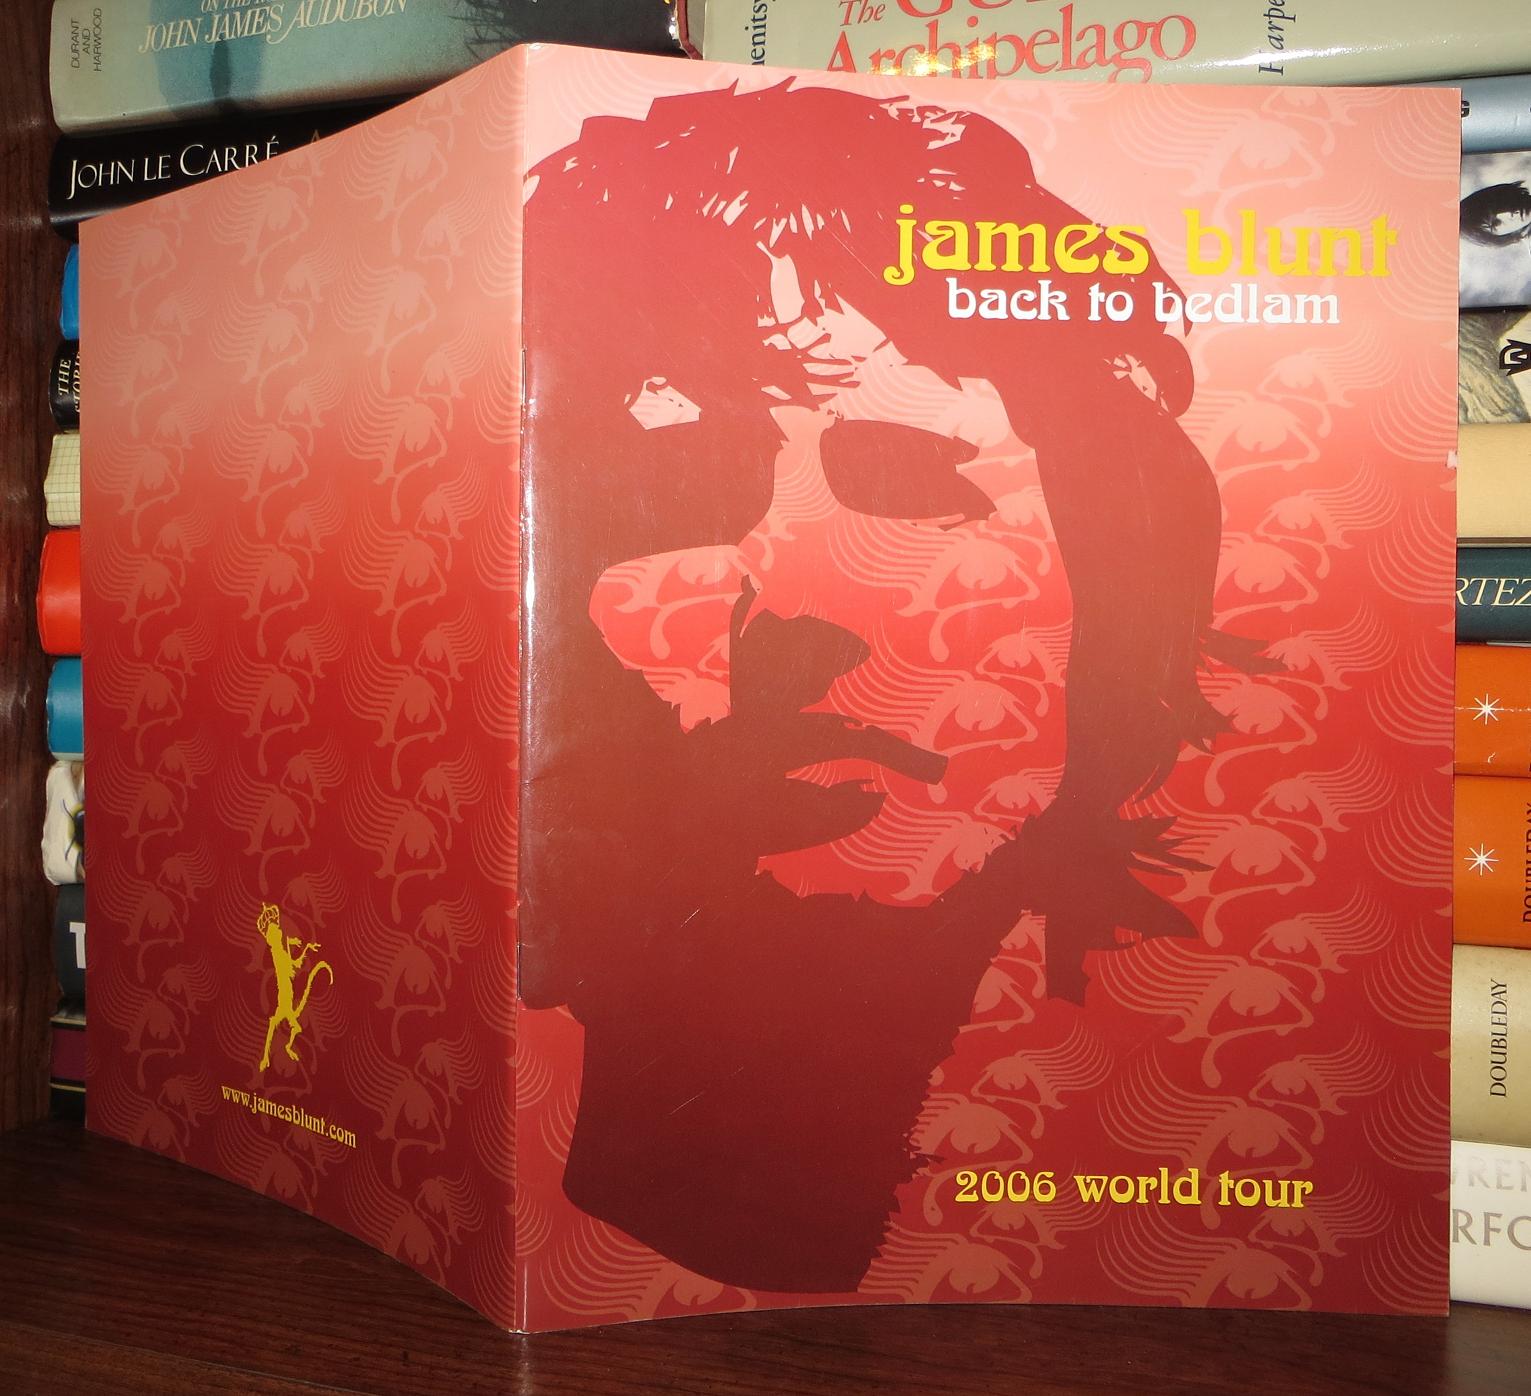 BACK TO BEDLAM by James Blunt on Rare Book Cellar